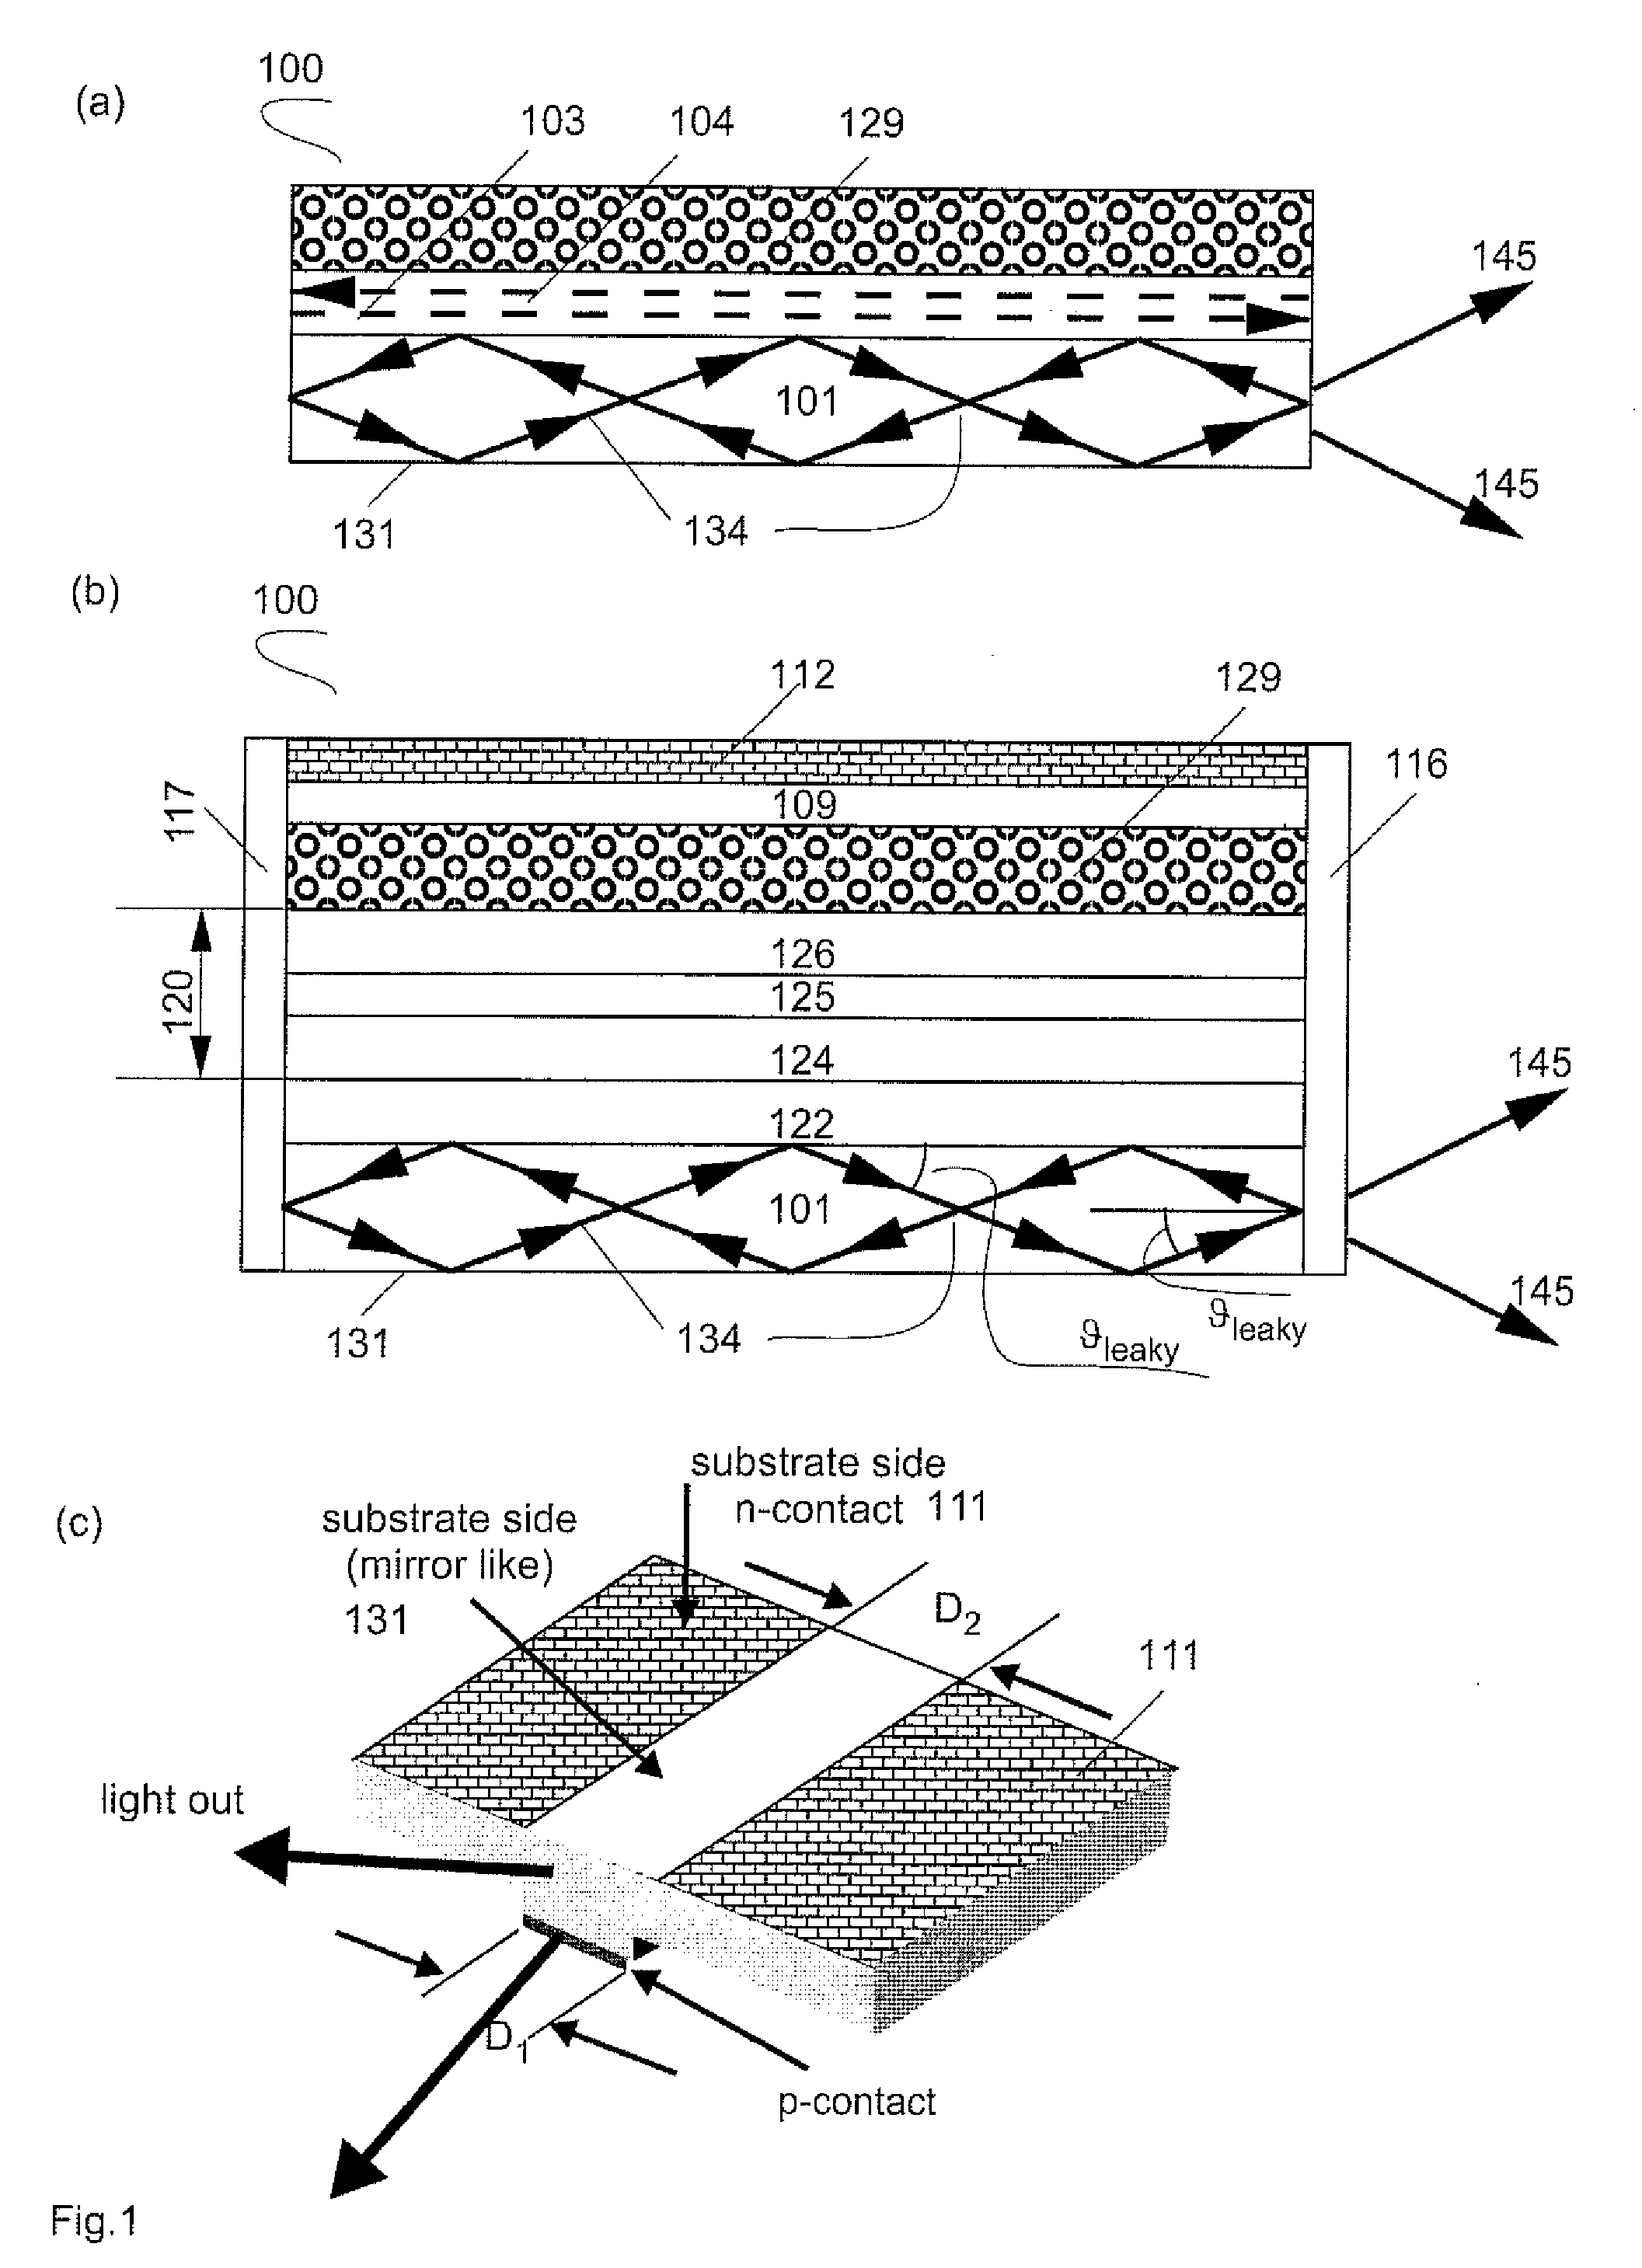 Method for improvement of beam quality and wavelength stabilized operation of a semiconductor diode laser with an extended waveguide